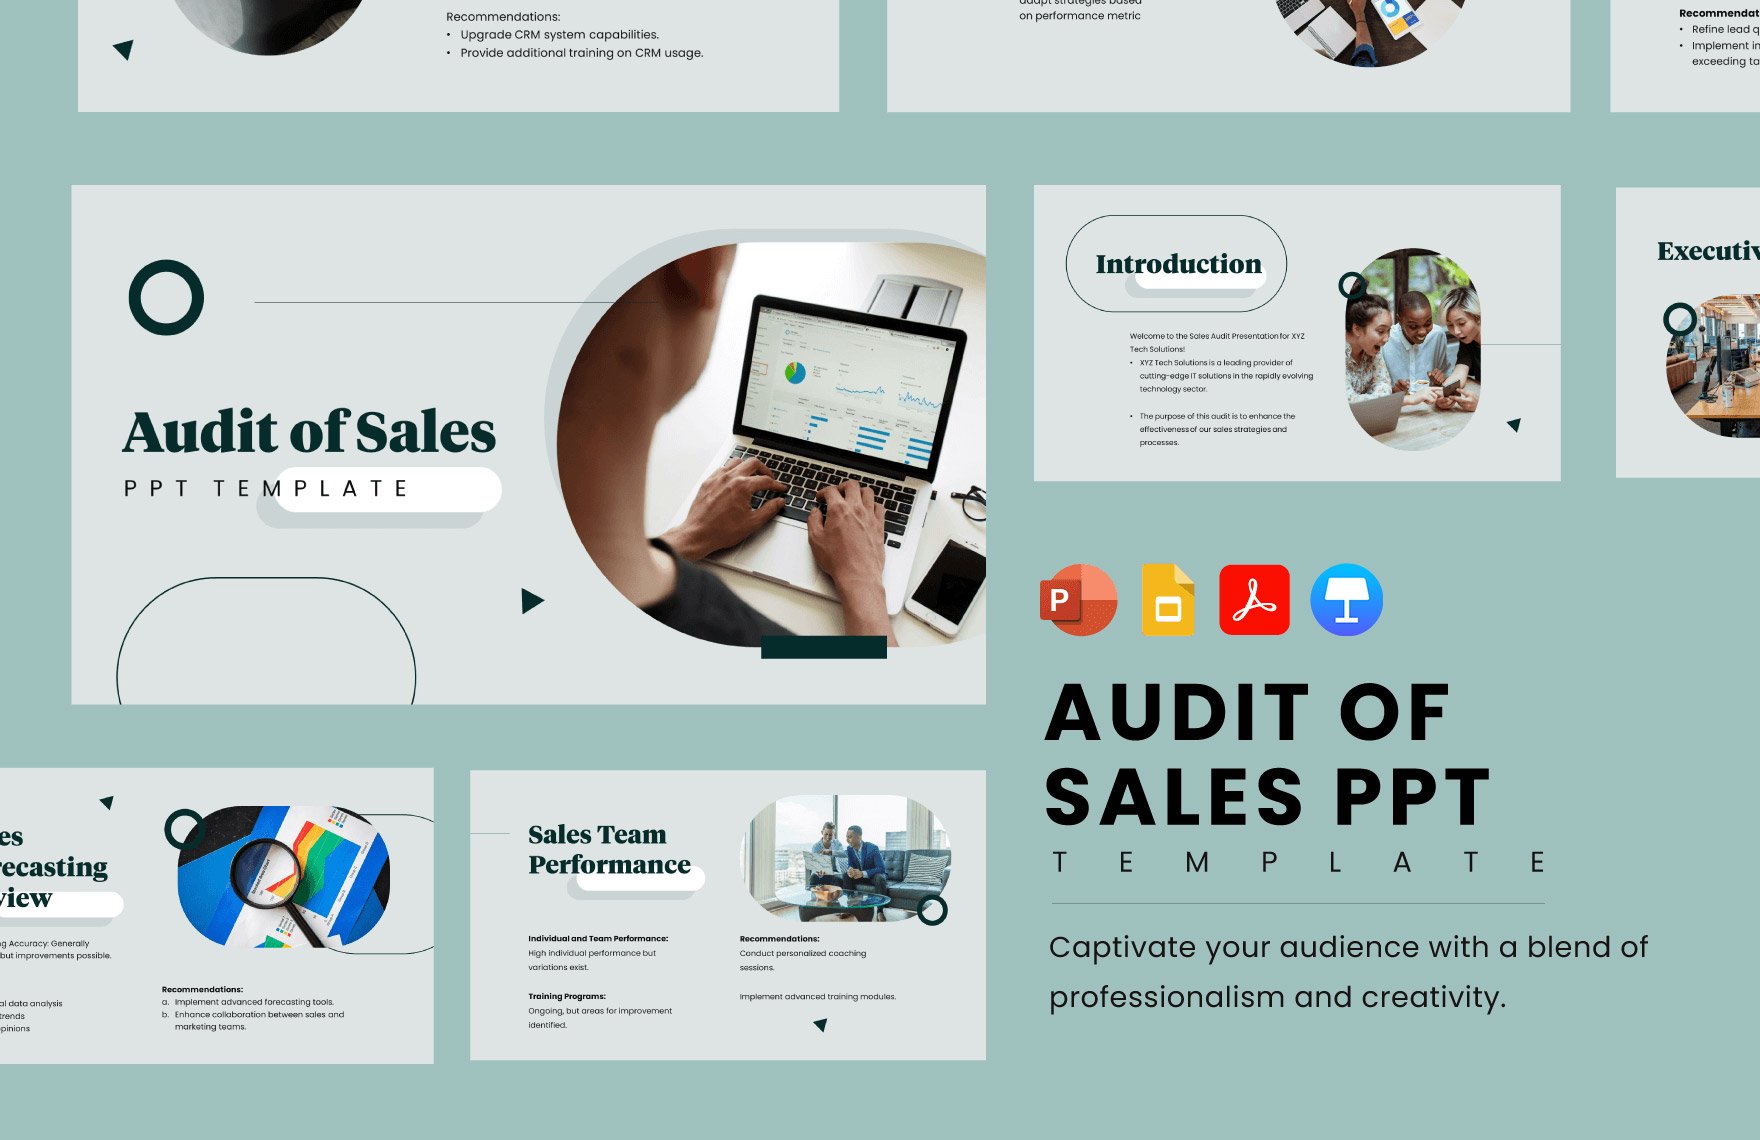 Audit of Sales PPT Template